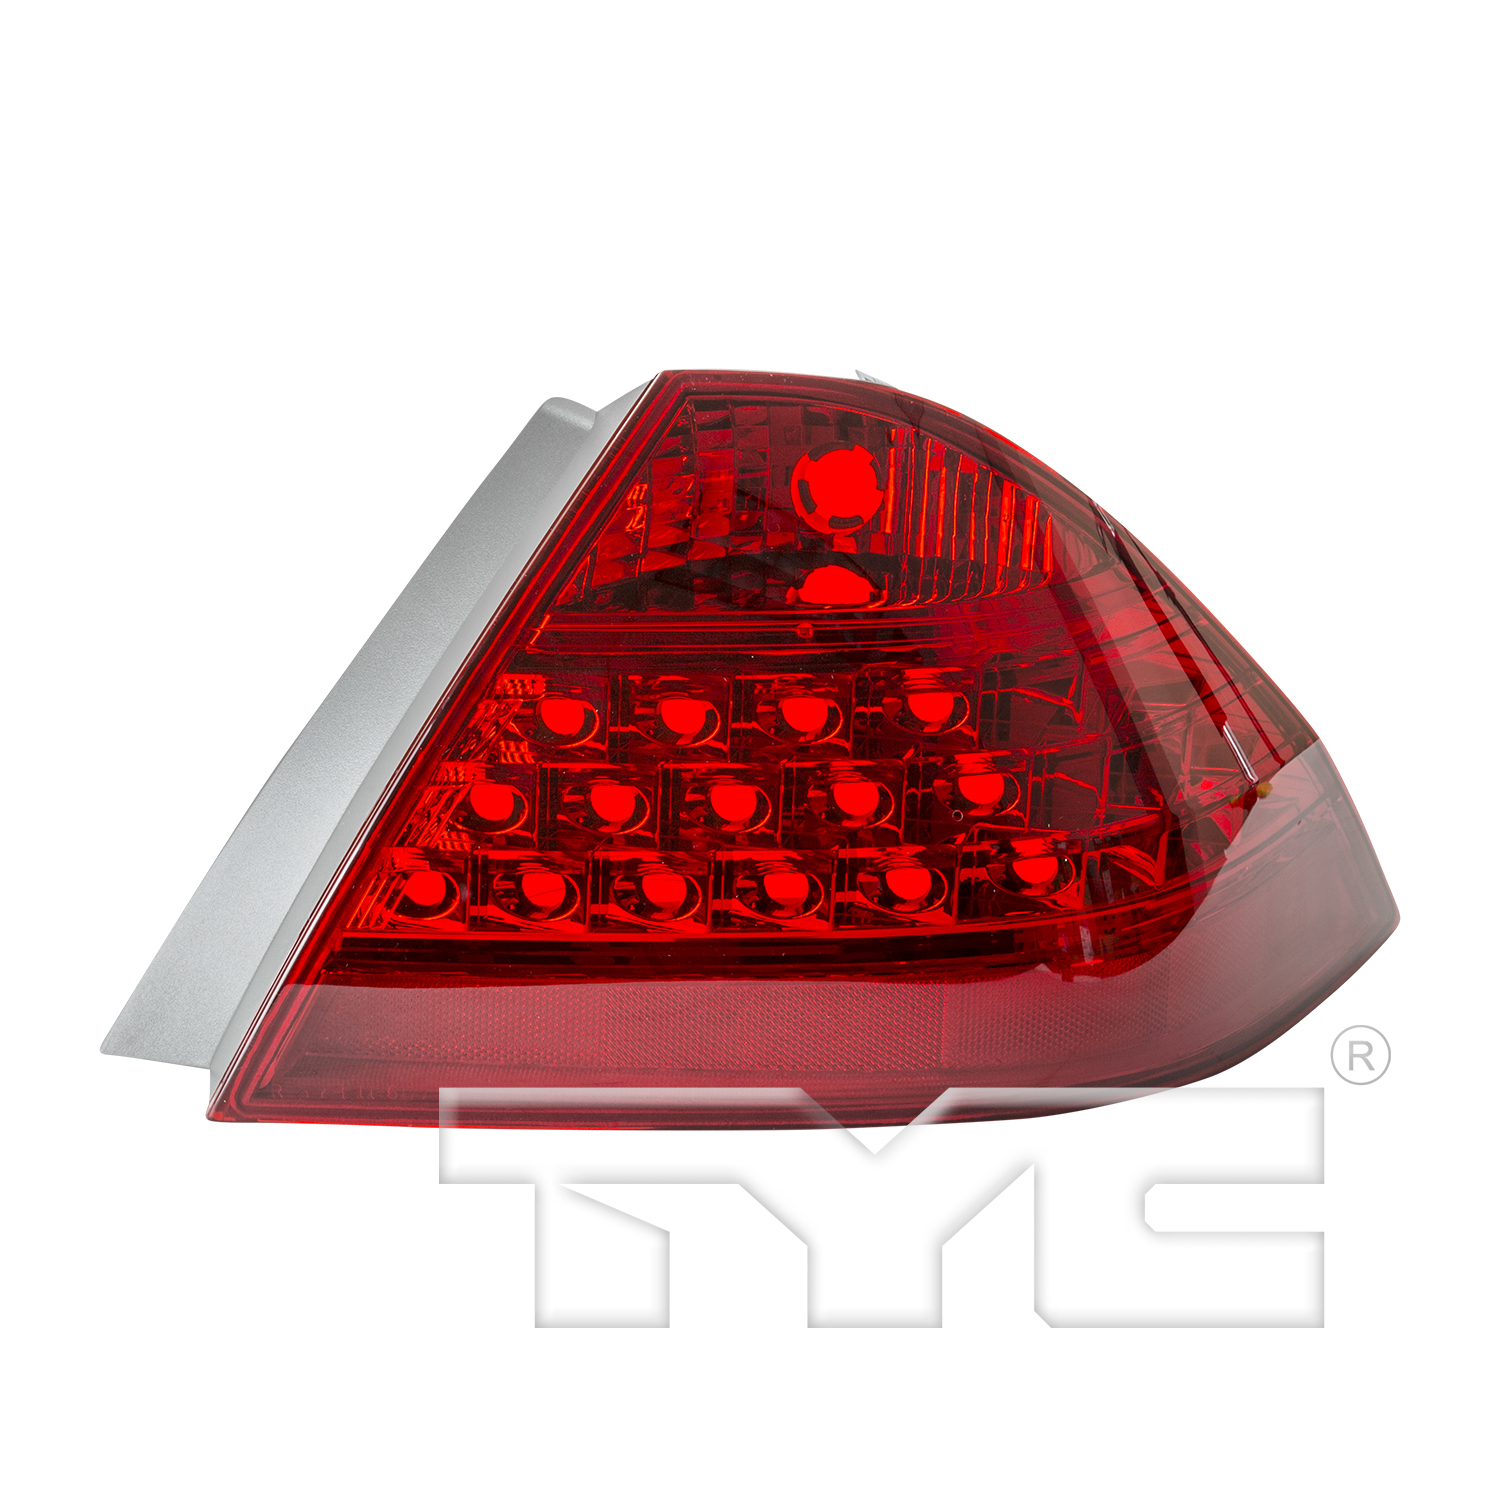 Aftermarket TAILLIGHTS for HONDA - ACCORD, ACCORD,06-07,RT Taillamp lens/housing